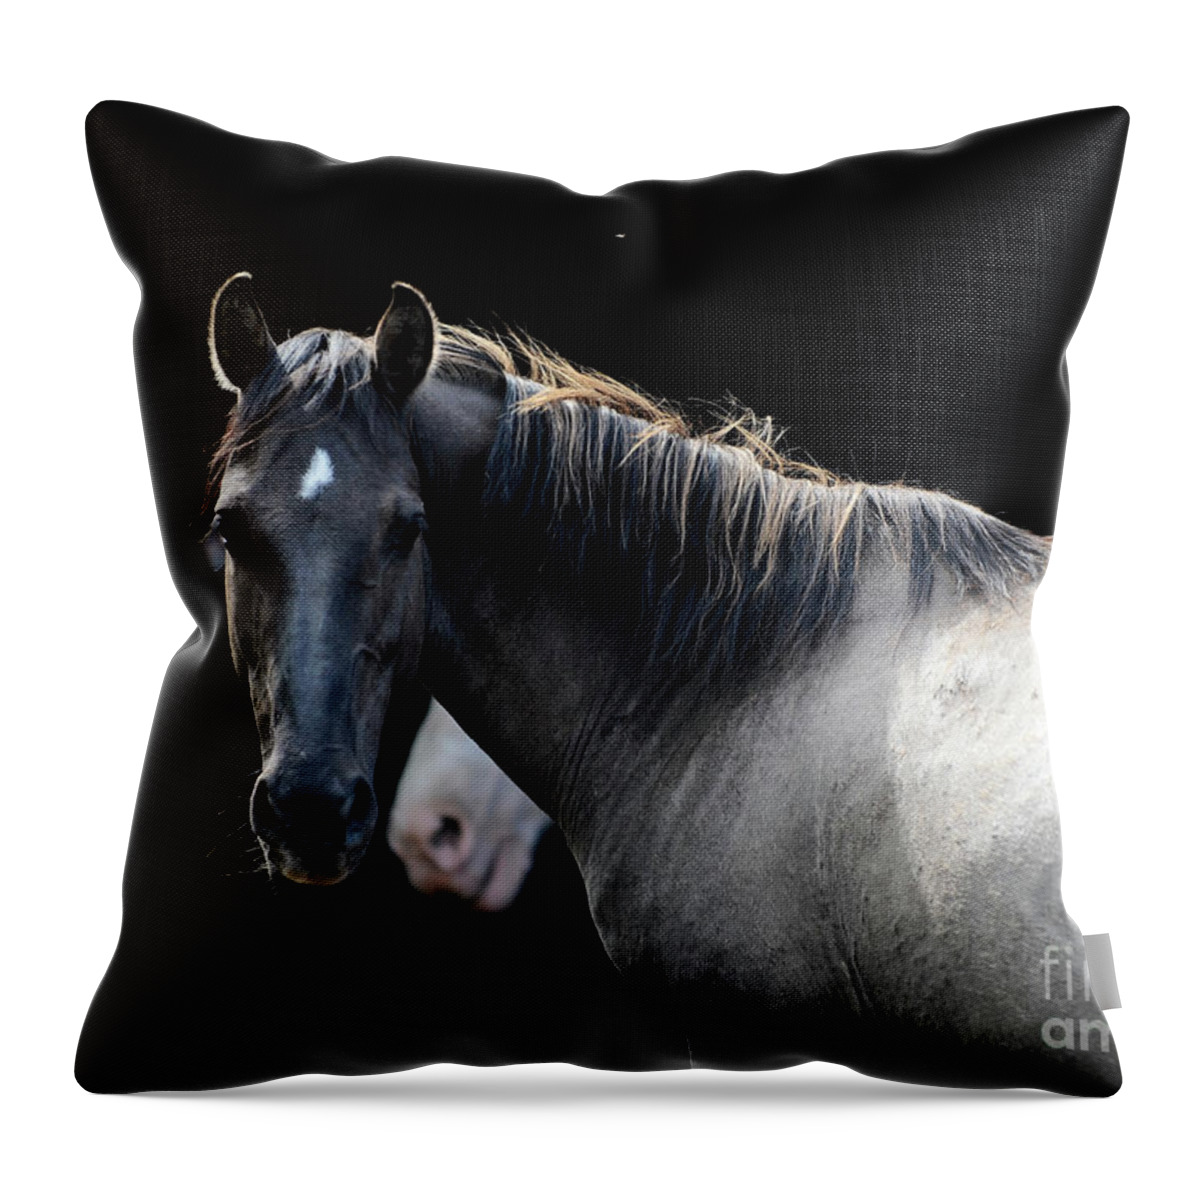 Rosemary Farm Sanctuary Throw Pillow featuring the photograph Senna by Carien Schippers